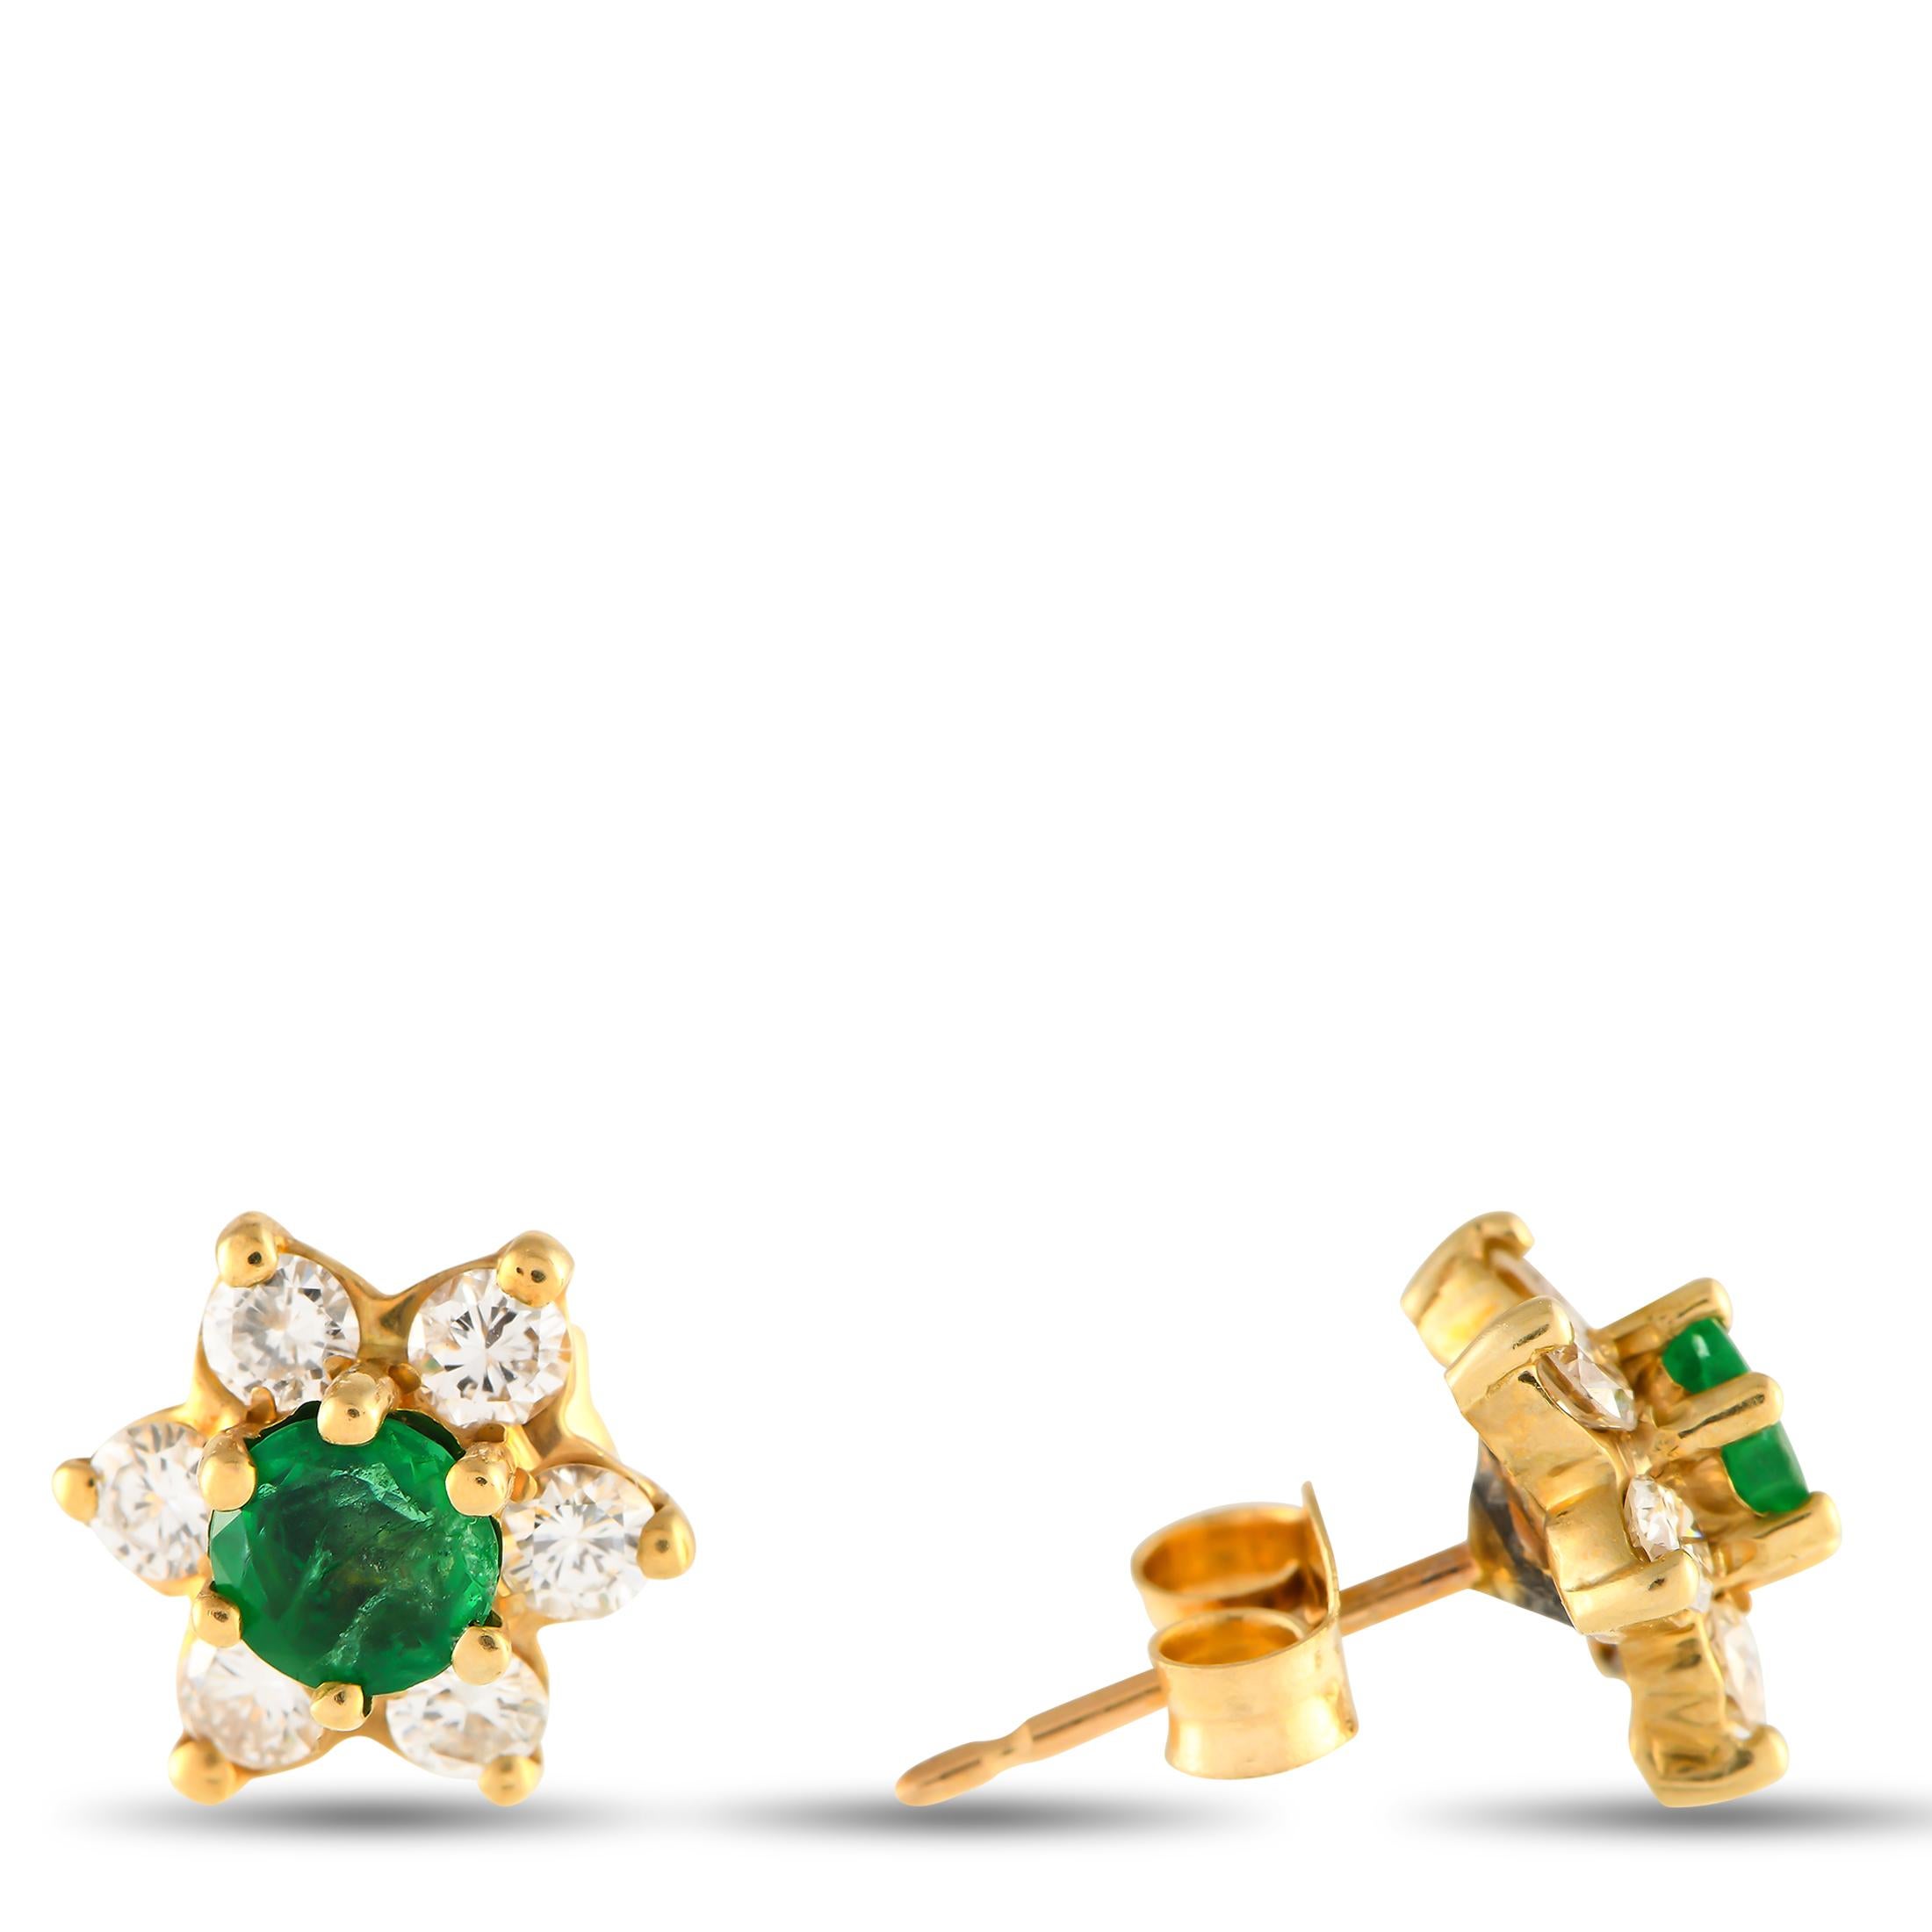 These radiant earrings will continually catch the light. Emeralds with a total weight of 0.60 carats add a pop of color to the center of the design, while a halo of Diamonds with a total weight of 0.50 carats provide the perfect amount of sparkle.